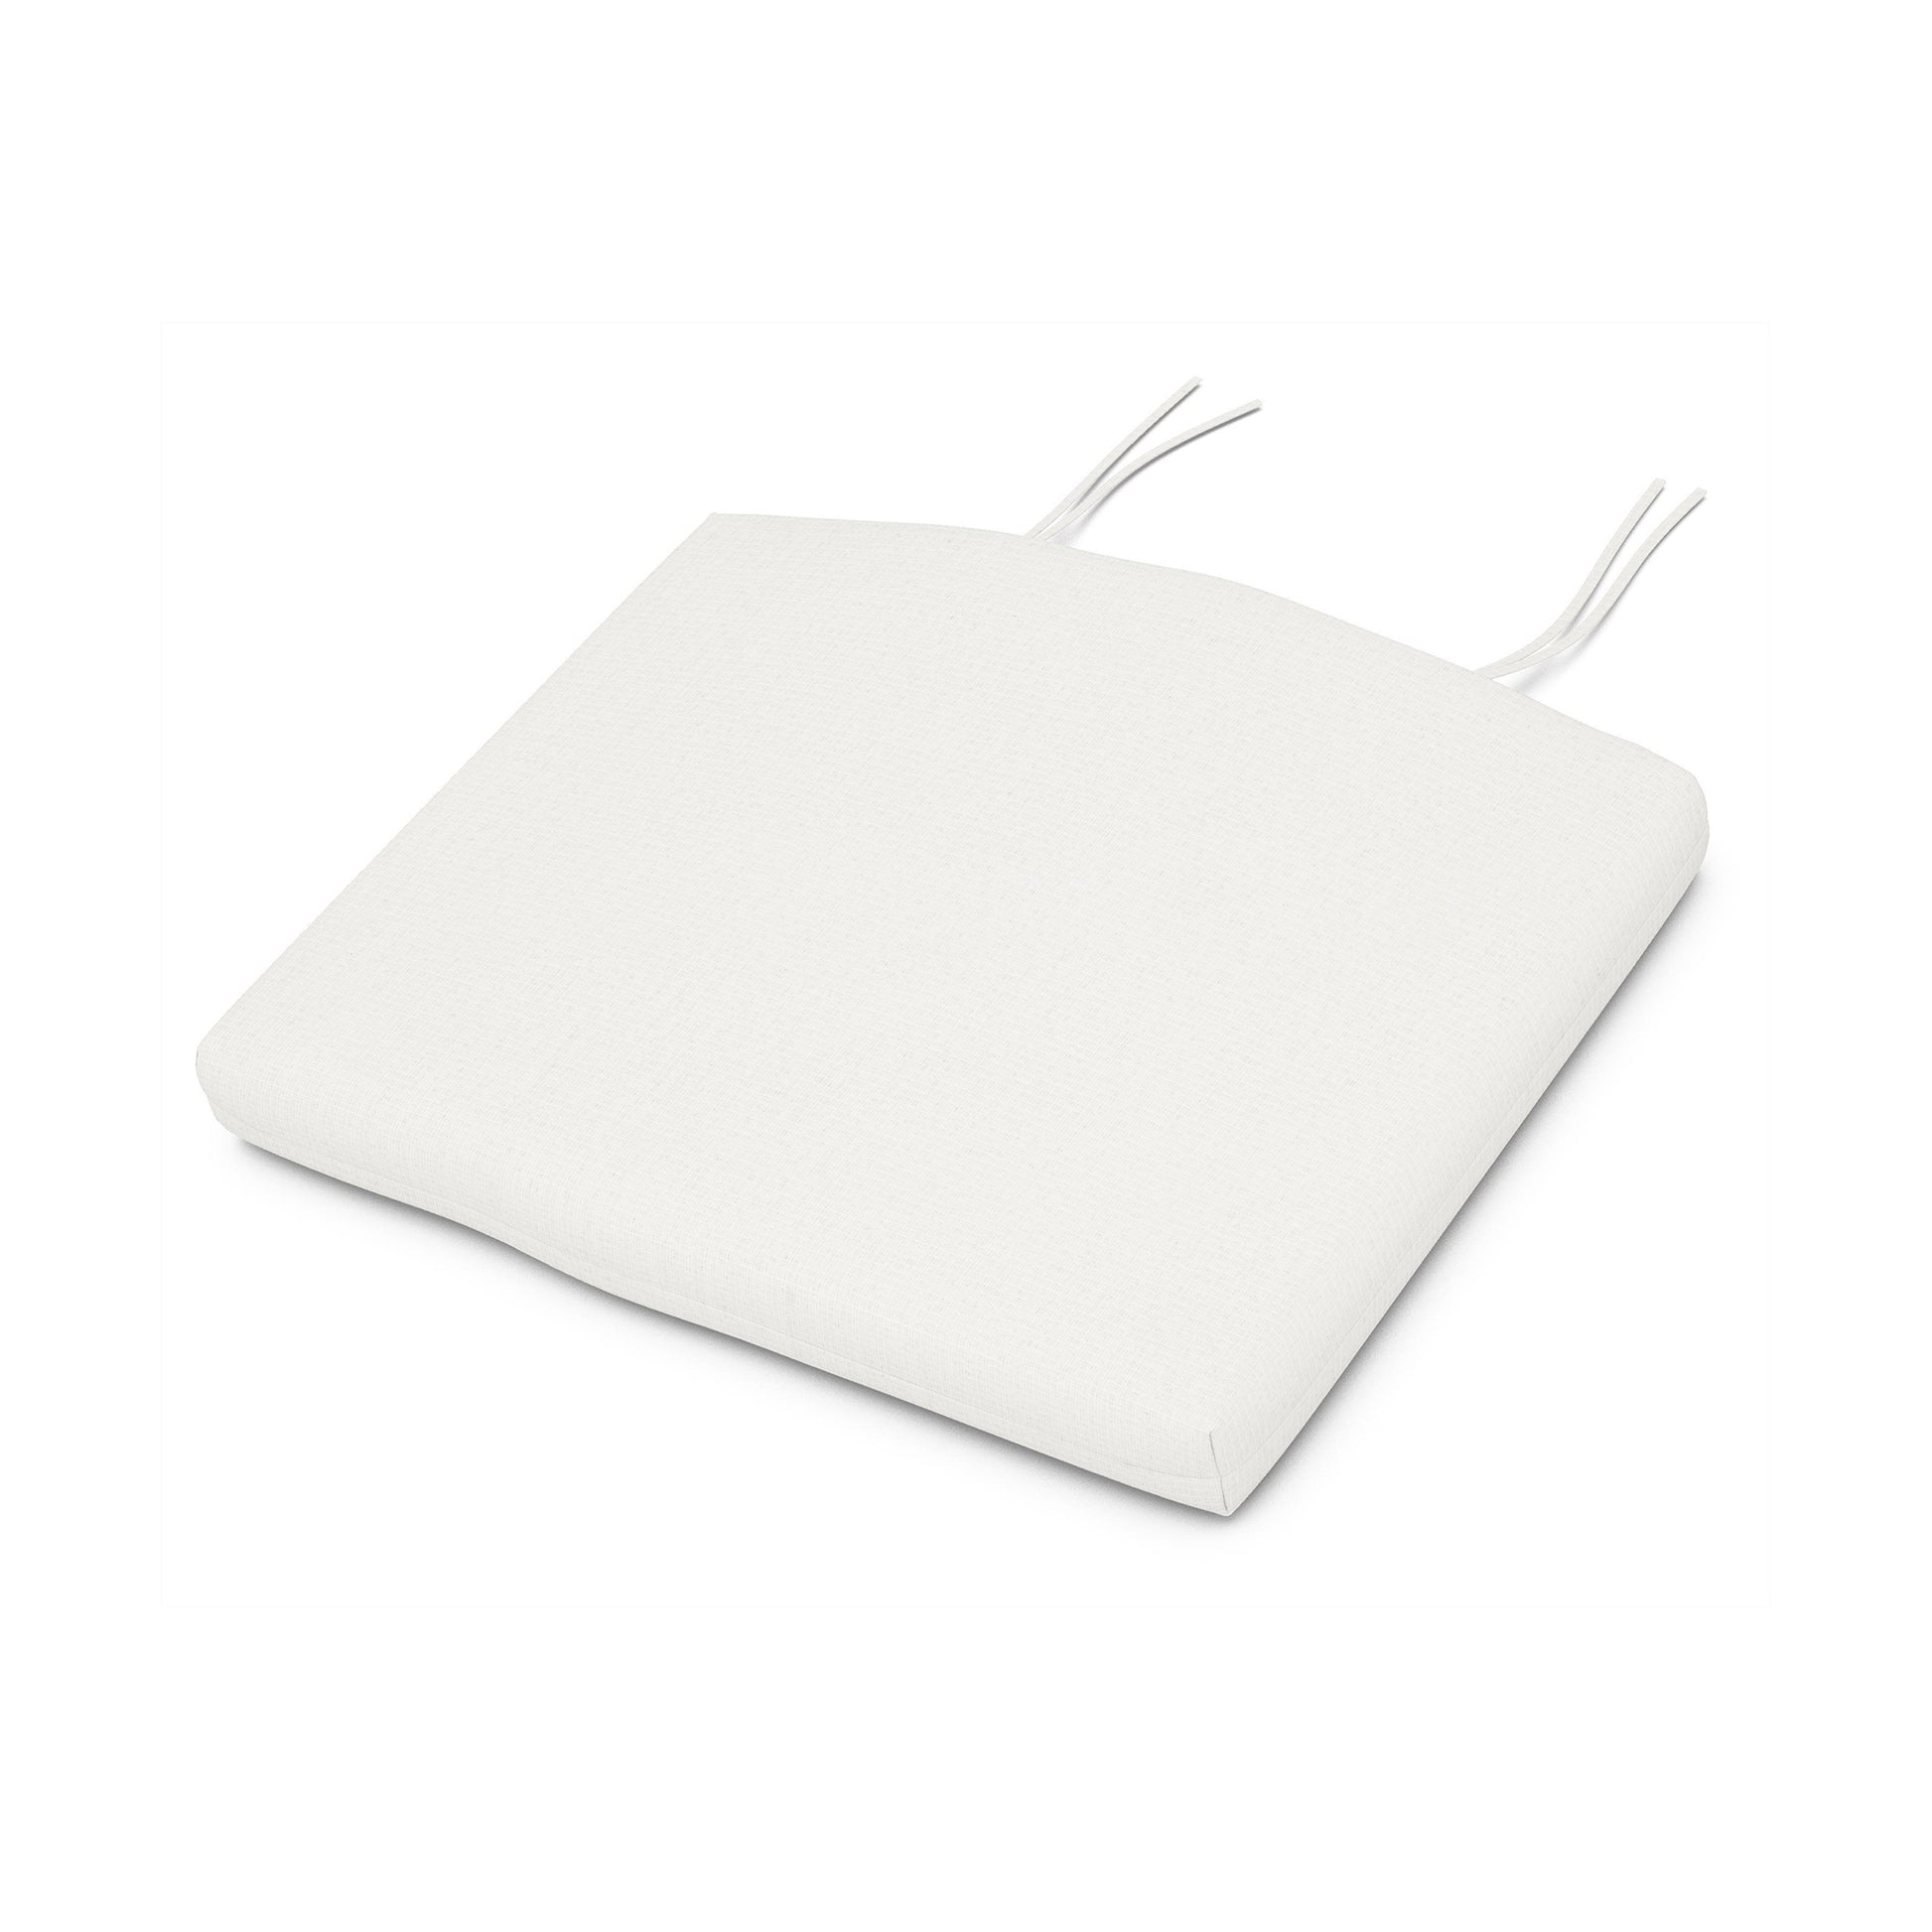 A plain, white square POLYWOOD® XPWS0003 - Seat Cushion with two tie straps at the back, positioned on a clean white background.